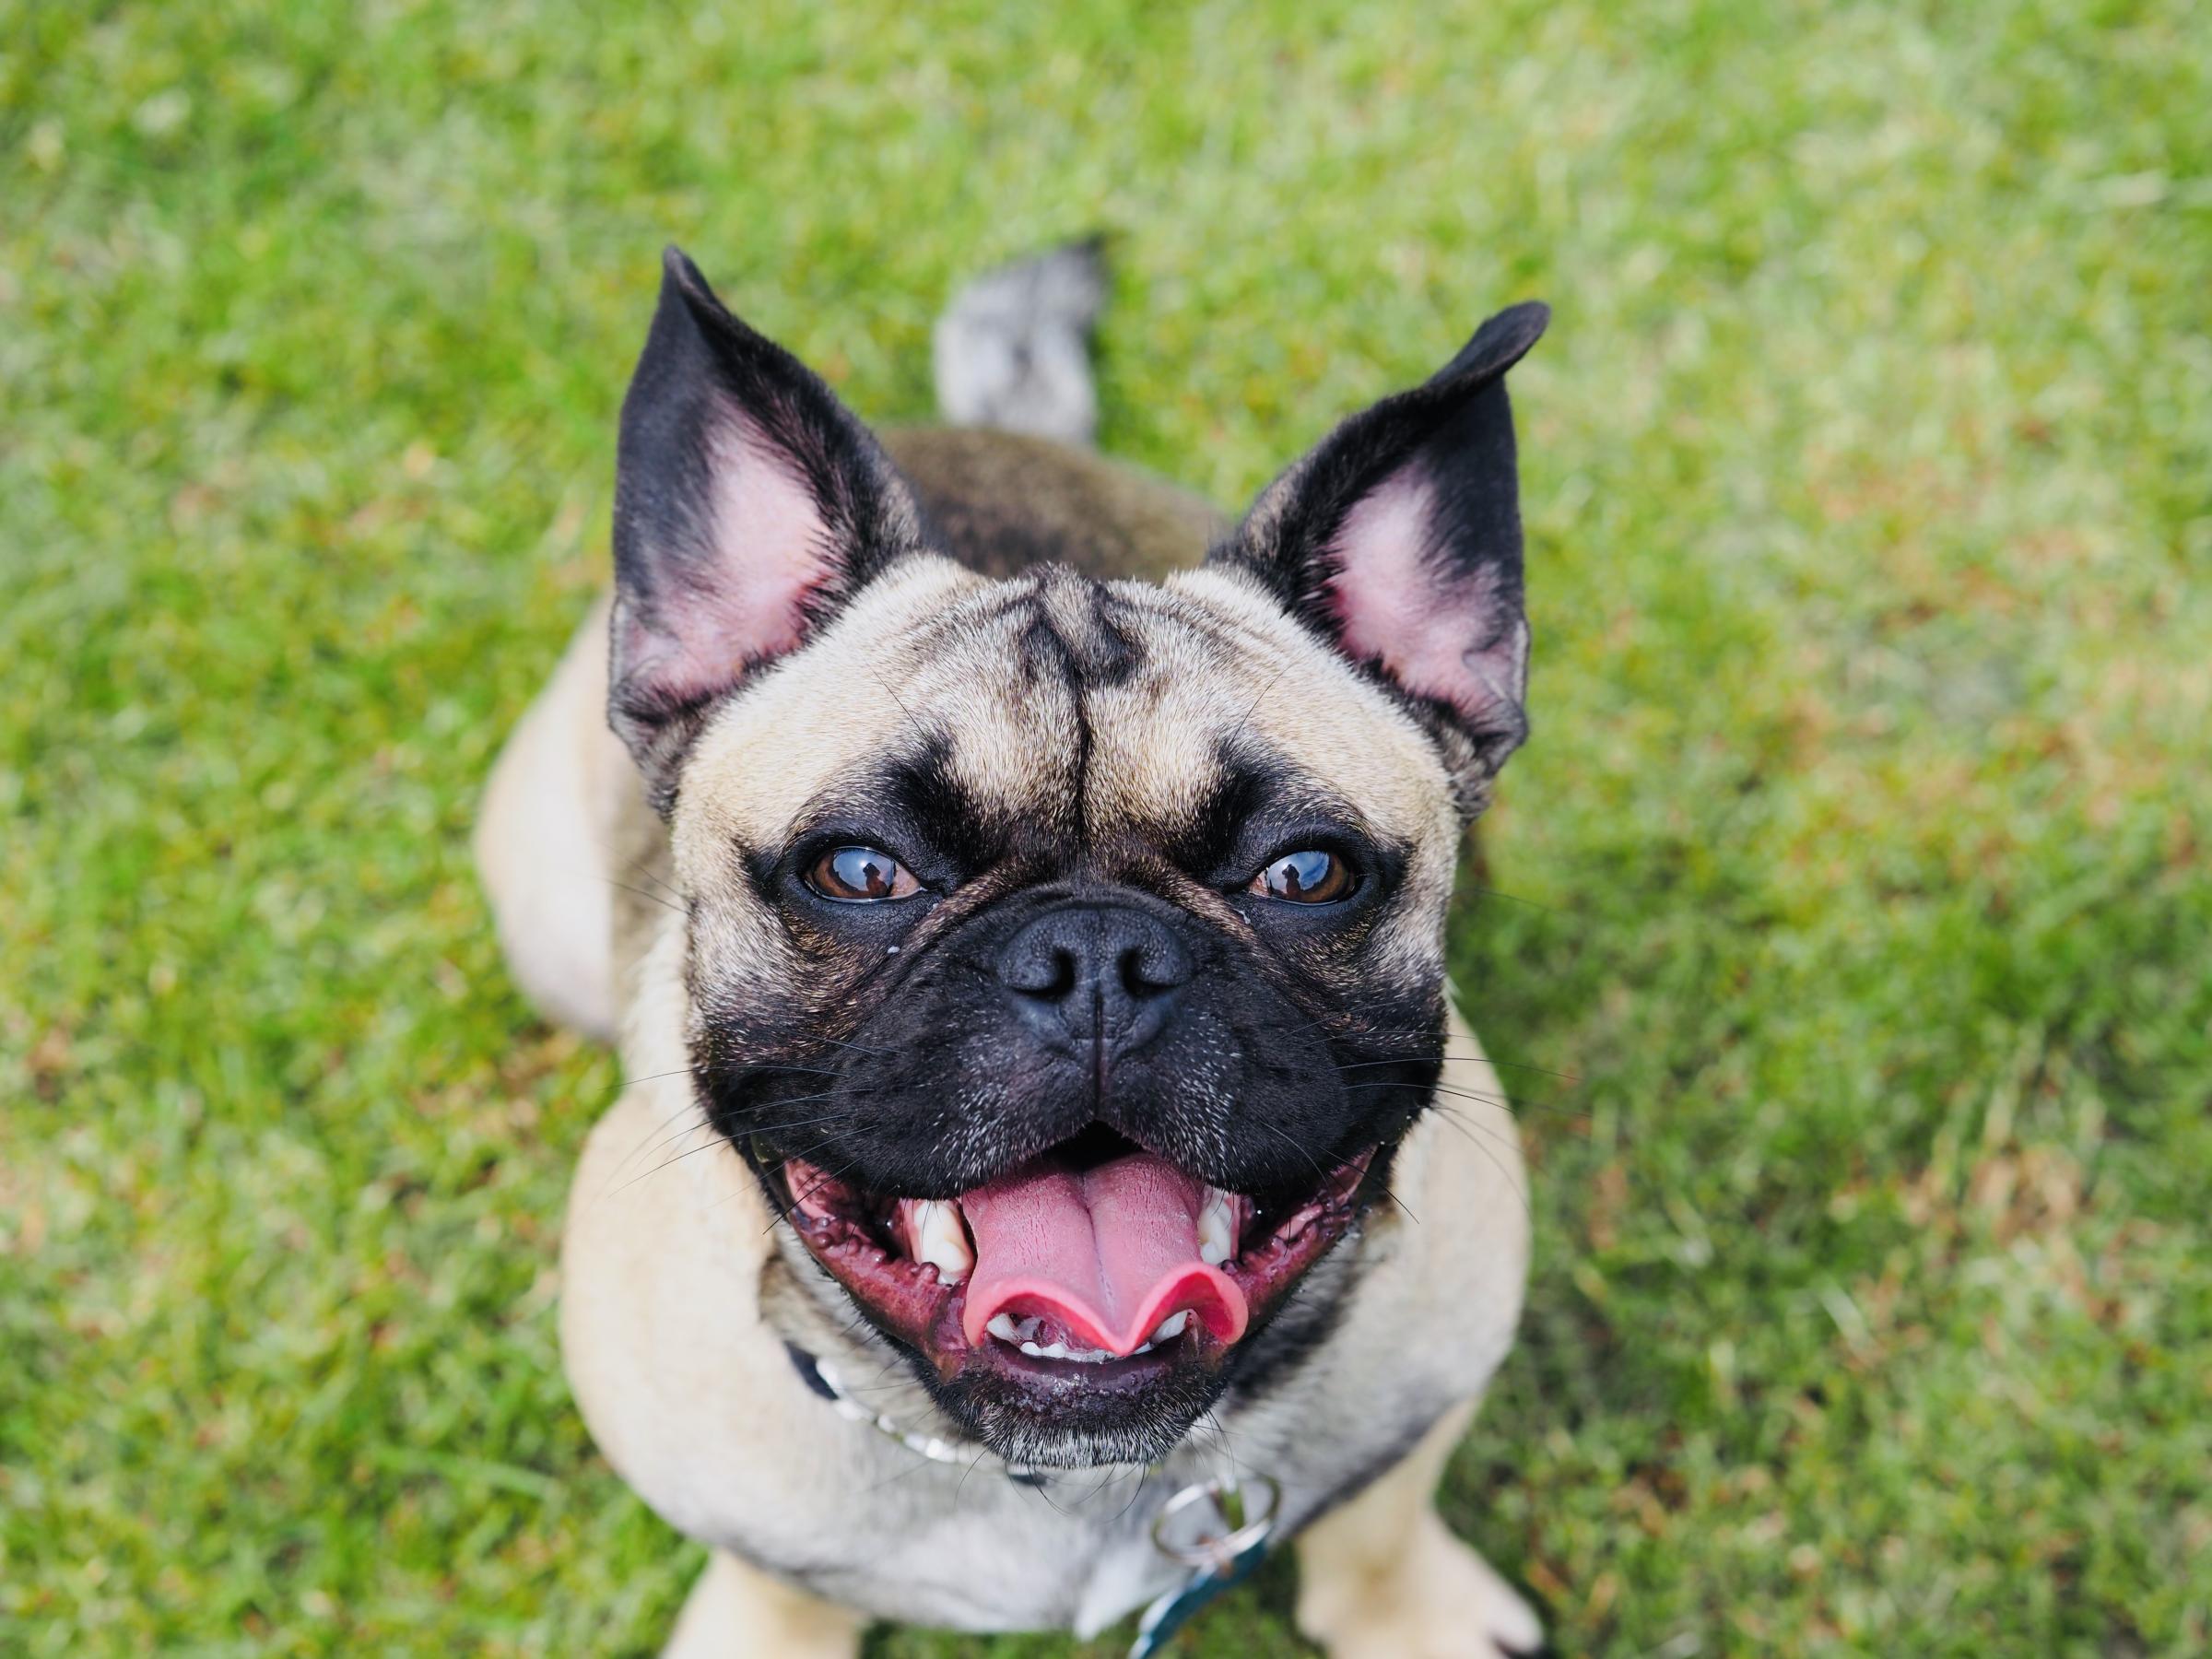 A French bulldog Pug mix awaiting instructions during a training session